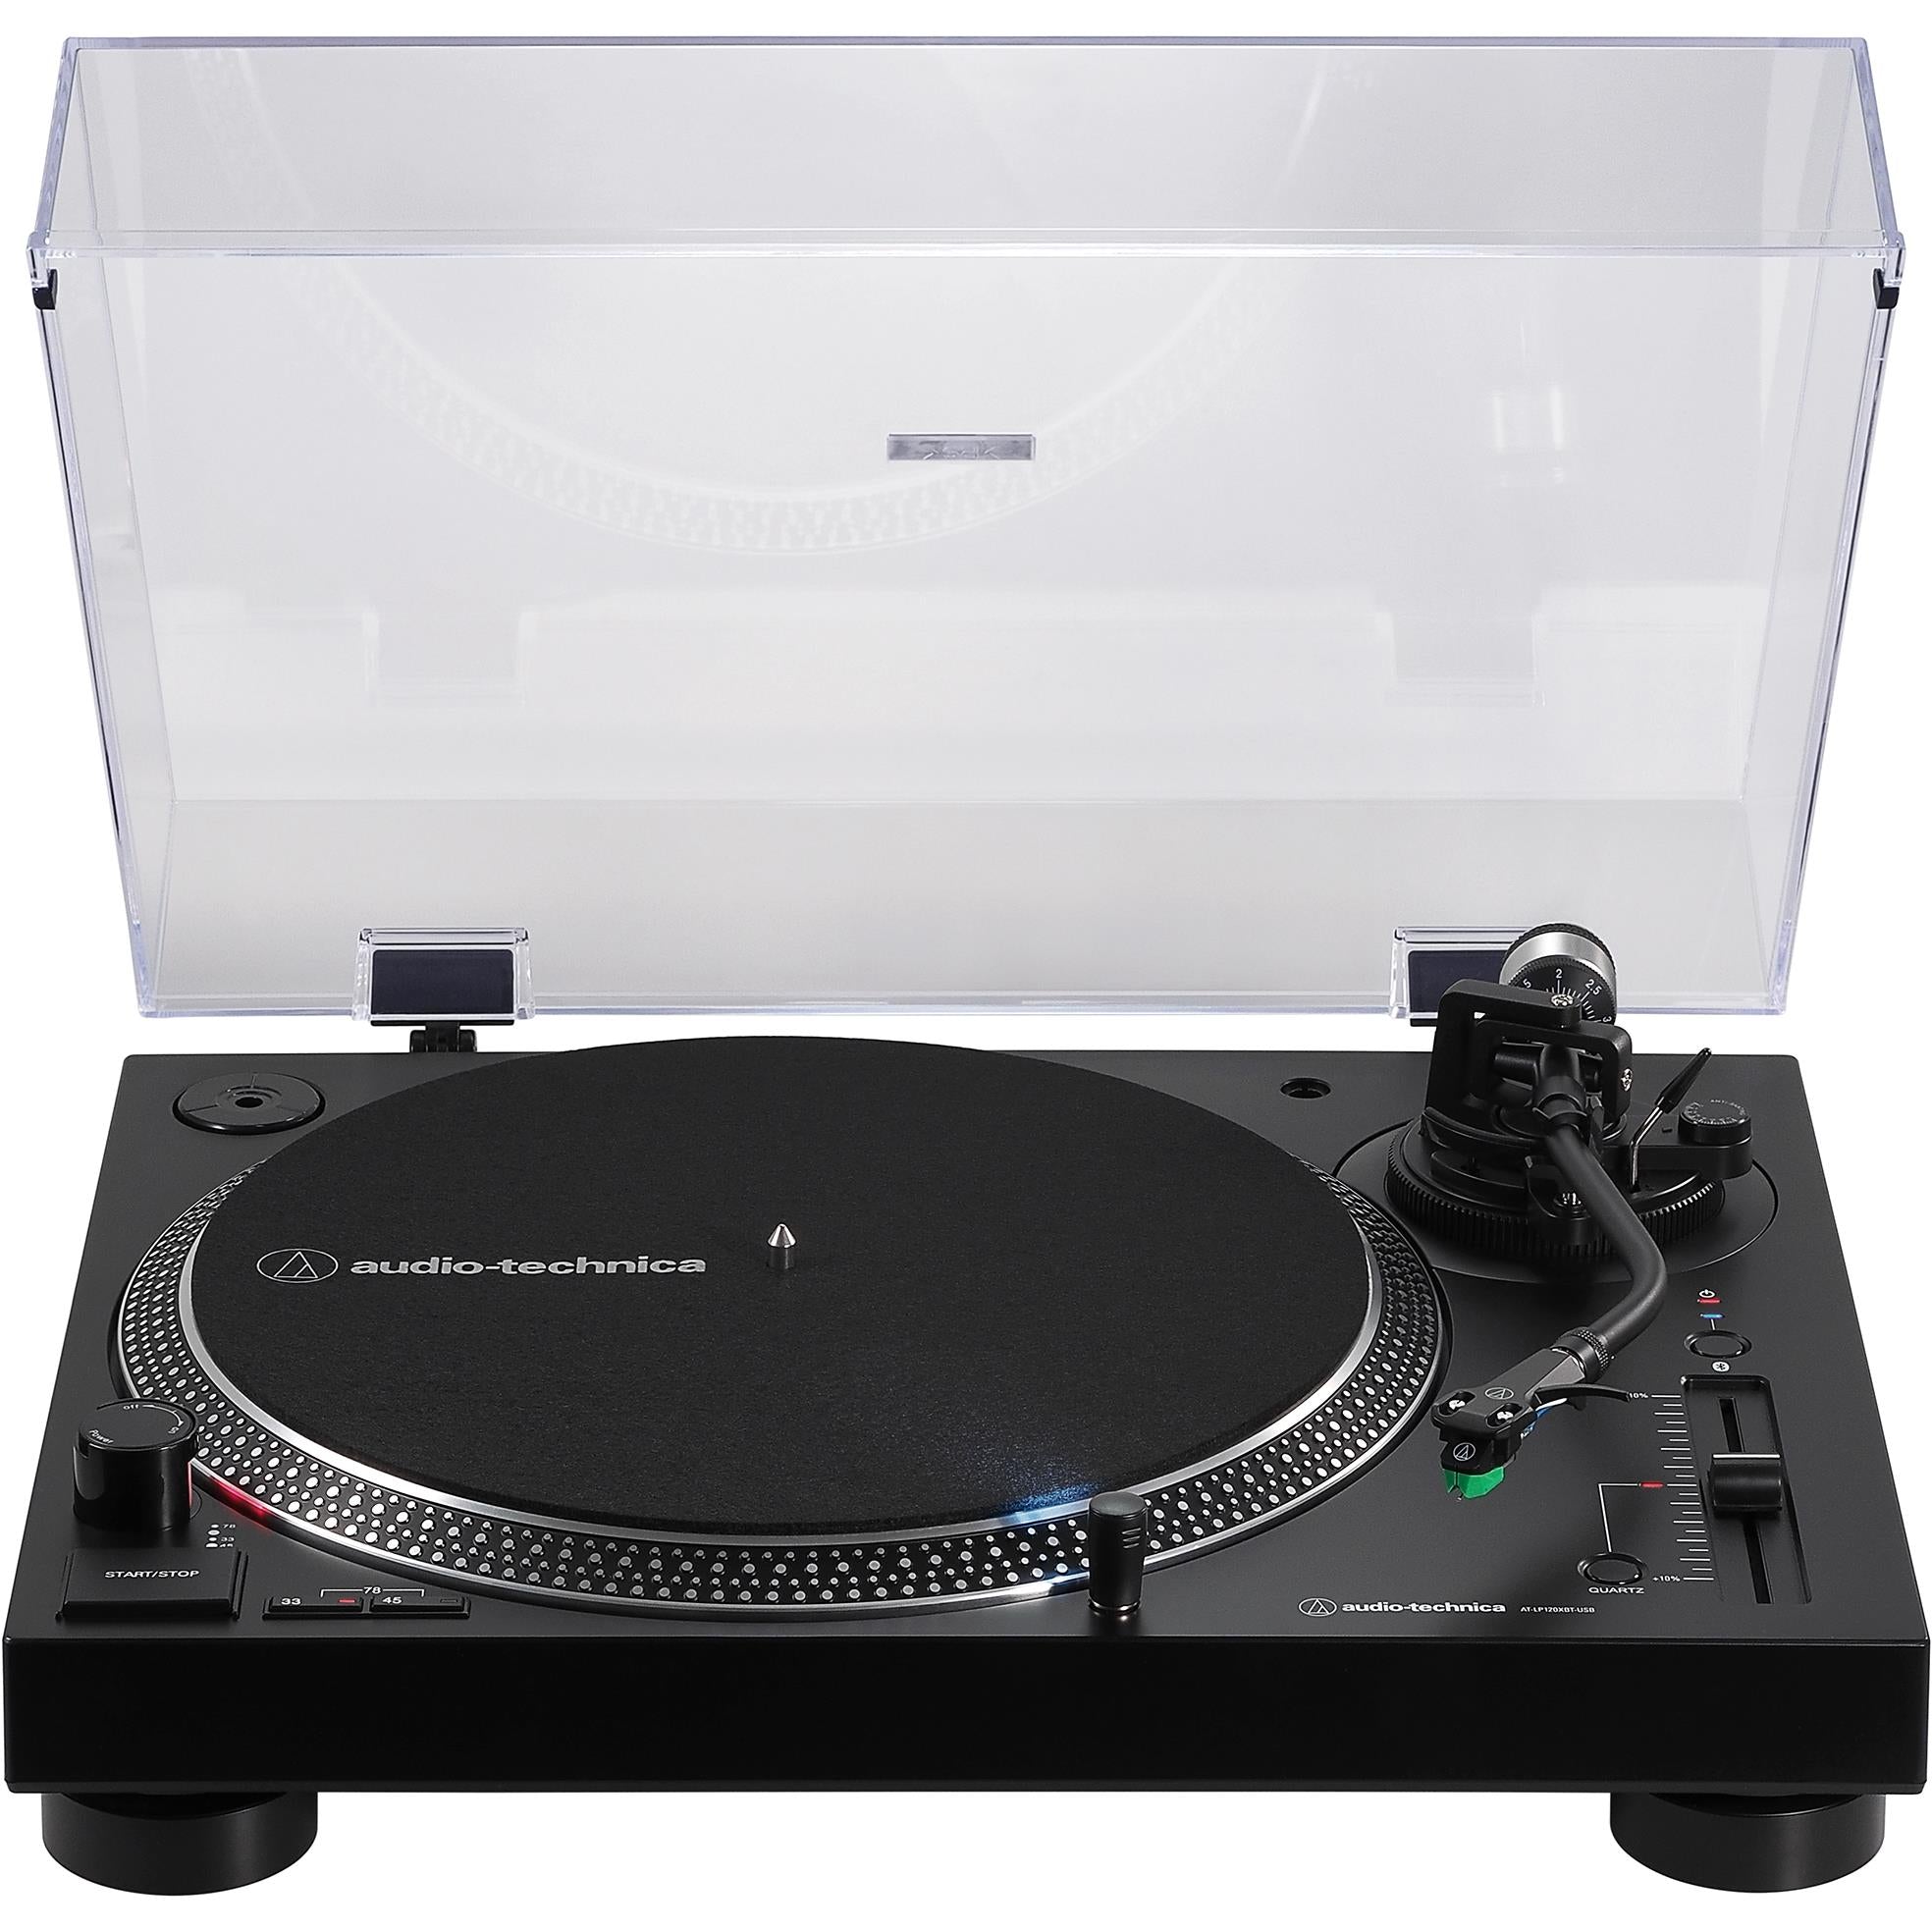 audio-technica lp120xbt fully manual direct drive turntable (black)